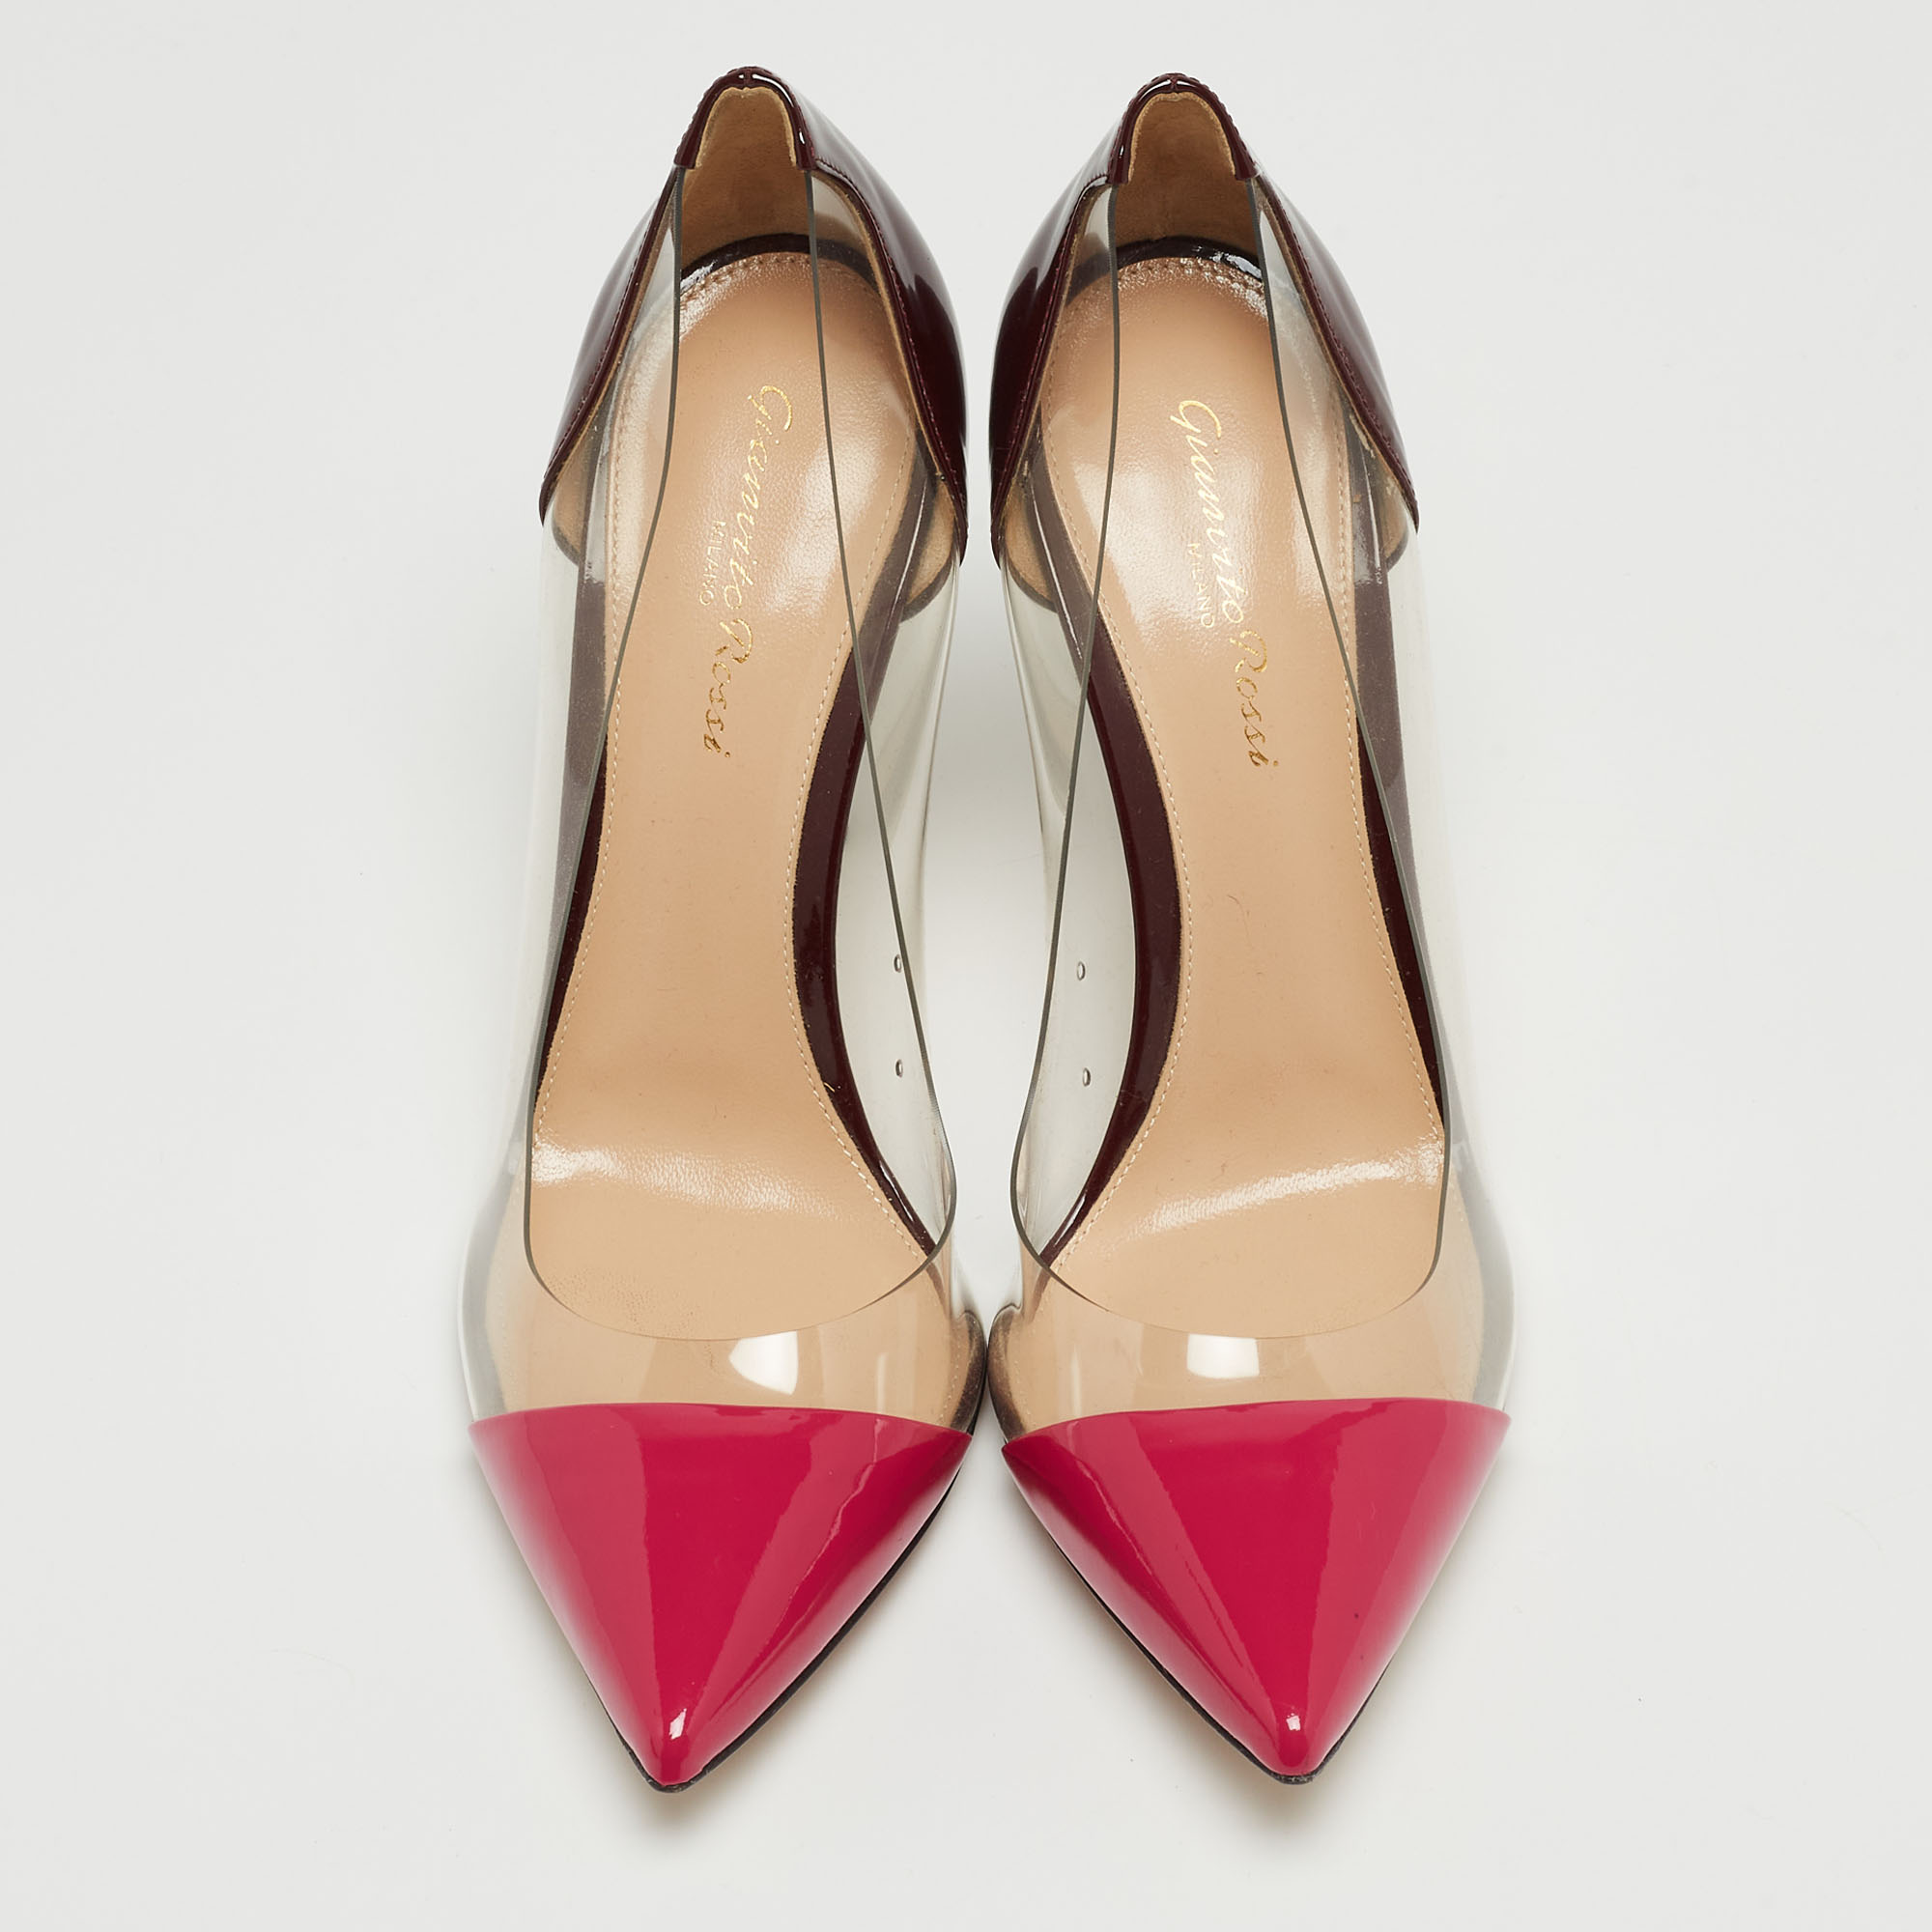 Gianvito Rossi Pink/Burgundy Patent Leather And PVC Plexi Pumps Size 38.5